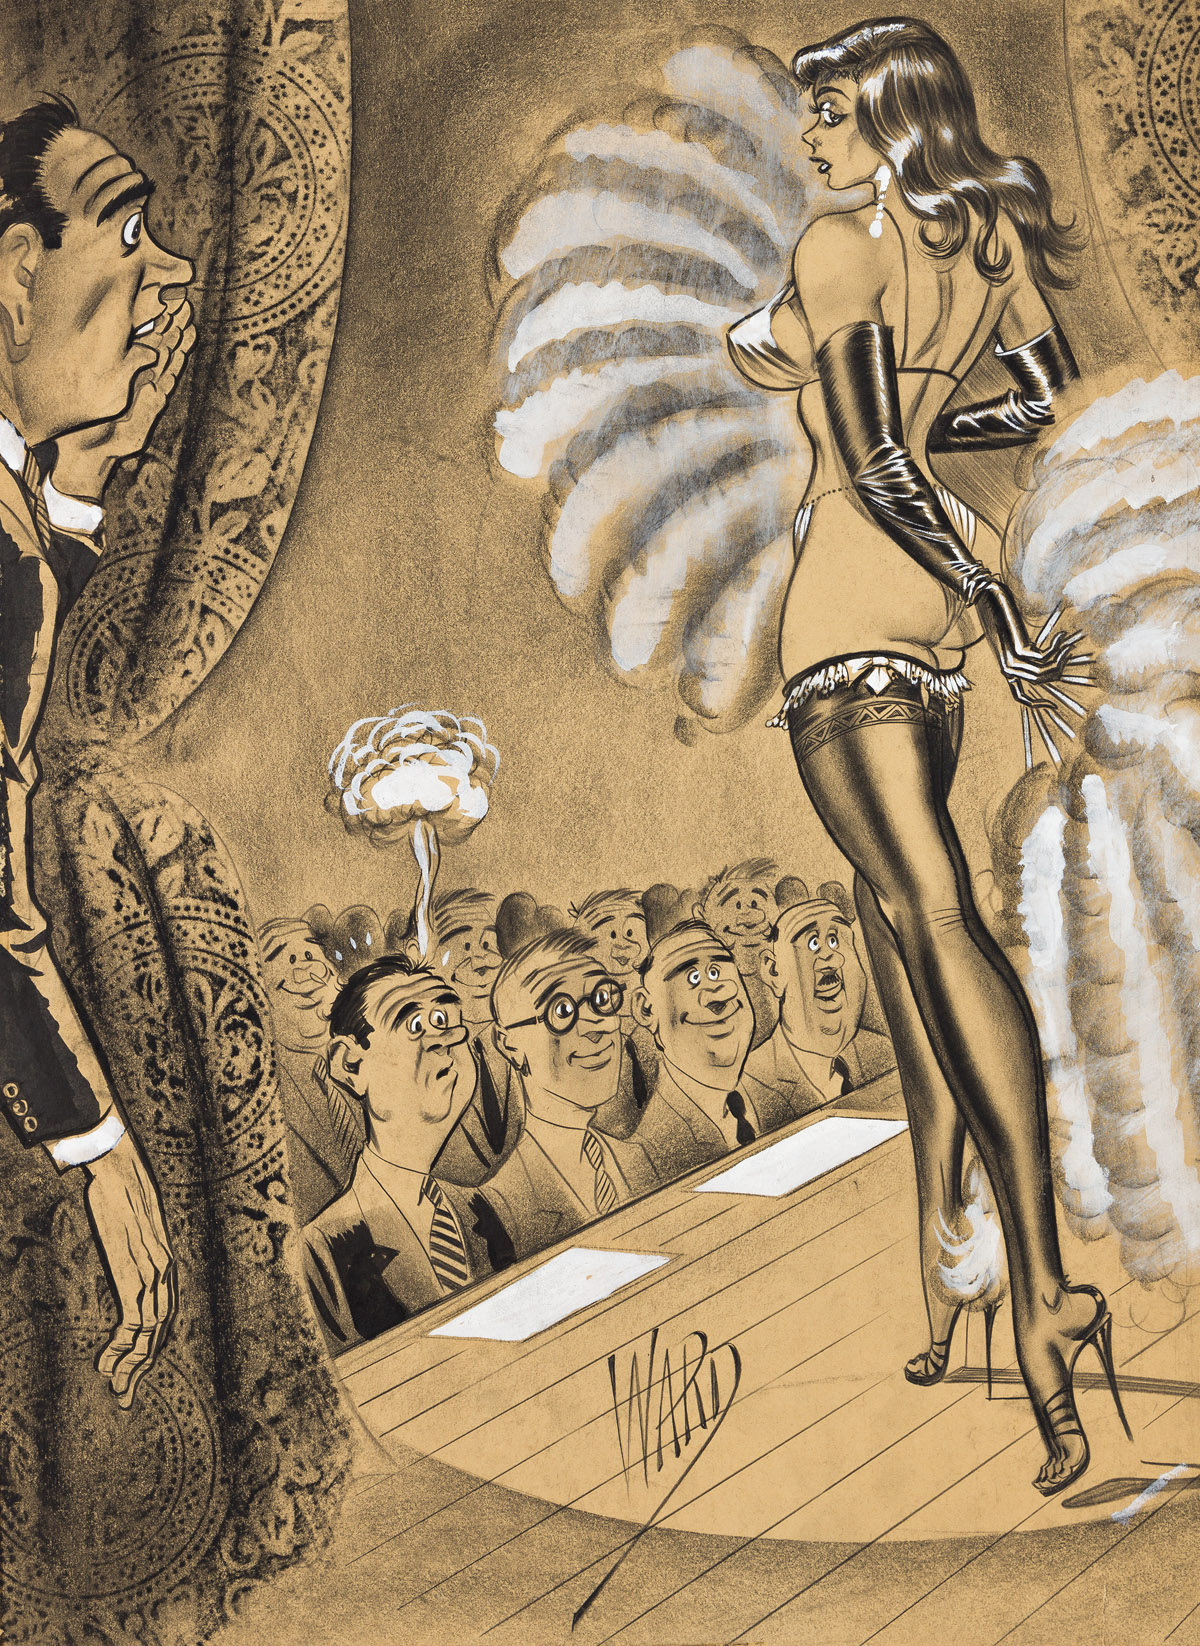 BILL WARD (1919-1998) Flossie-be careful not to fan the guy in the first row-hes aft to burst into flames! [CARTOON / PIN-UP]